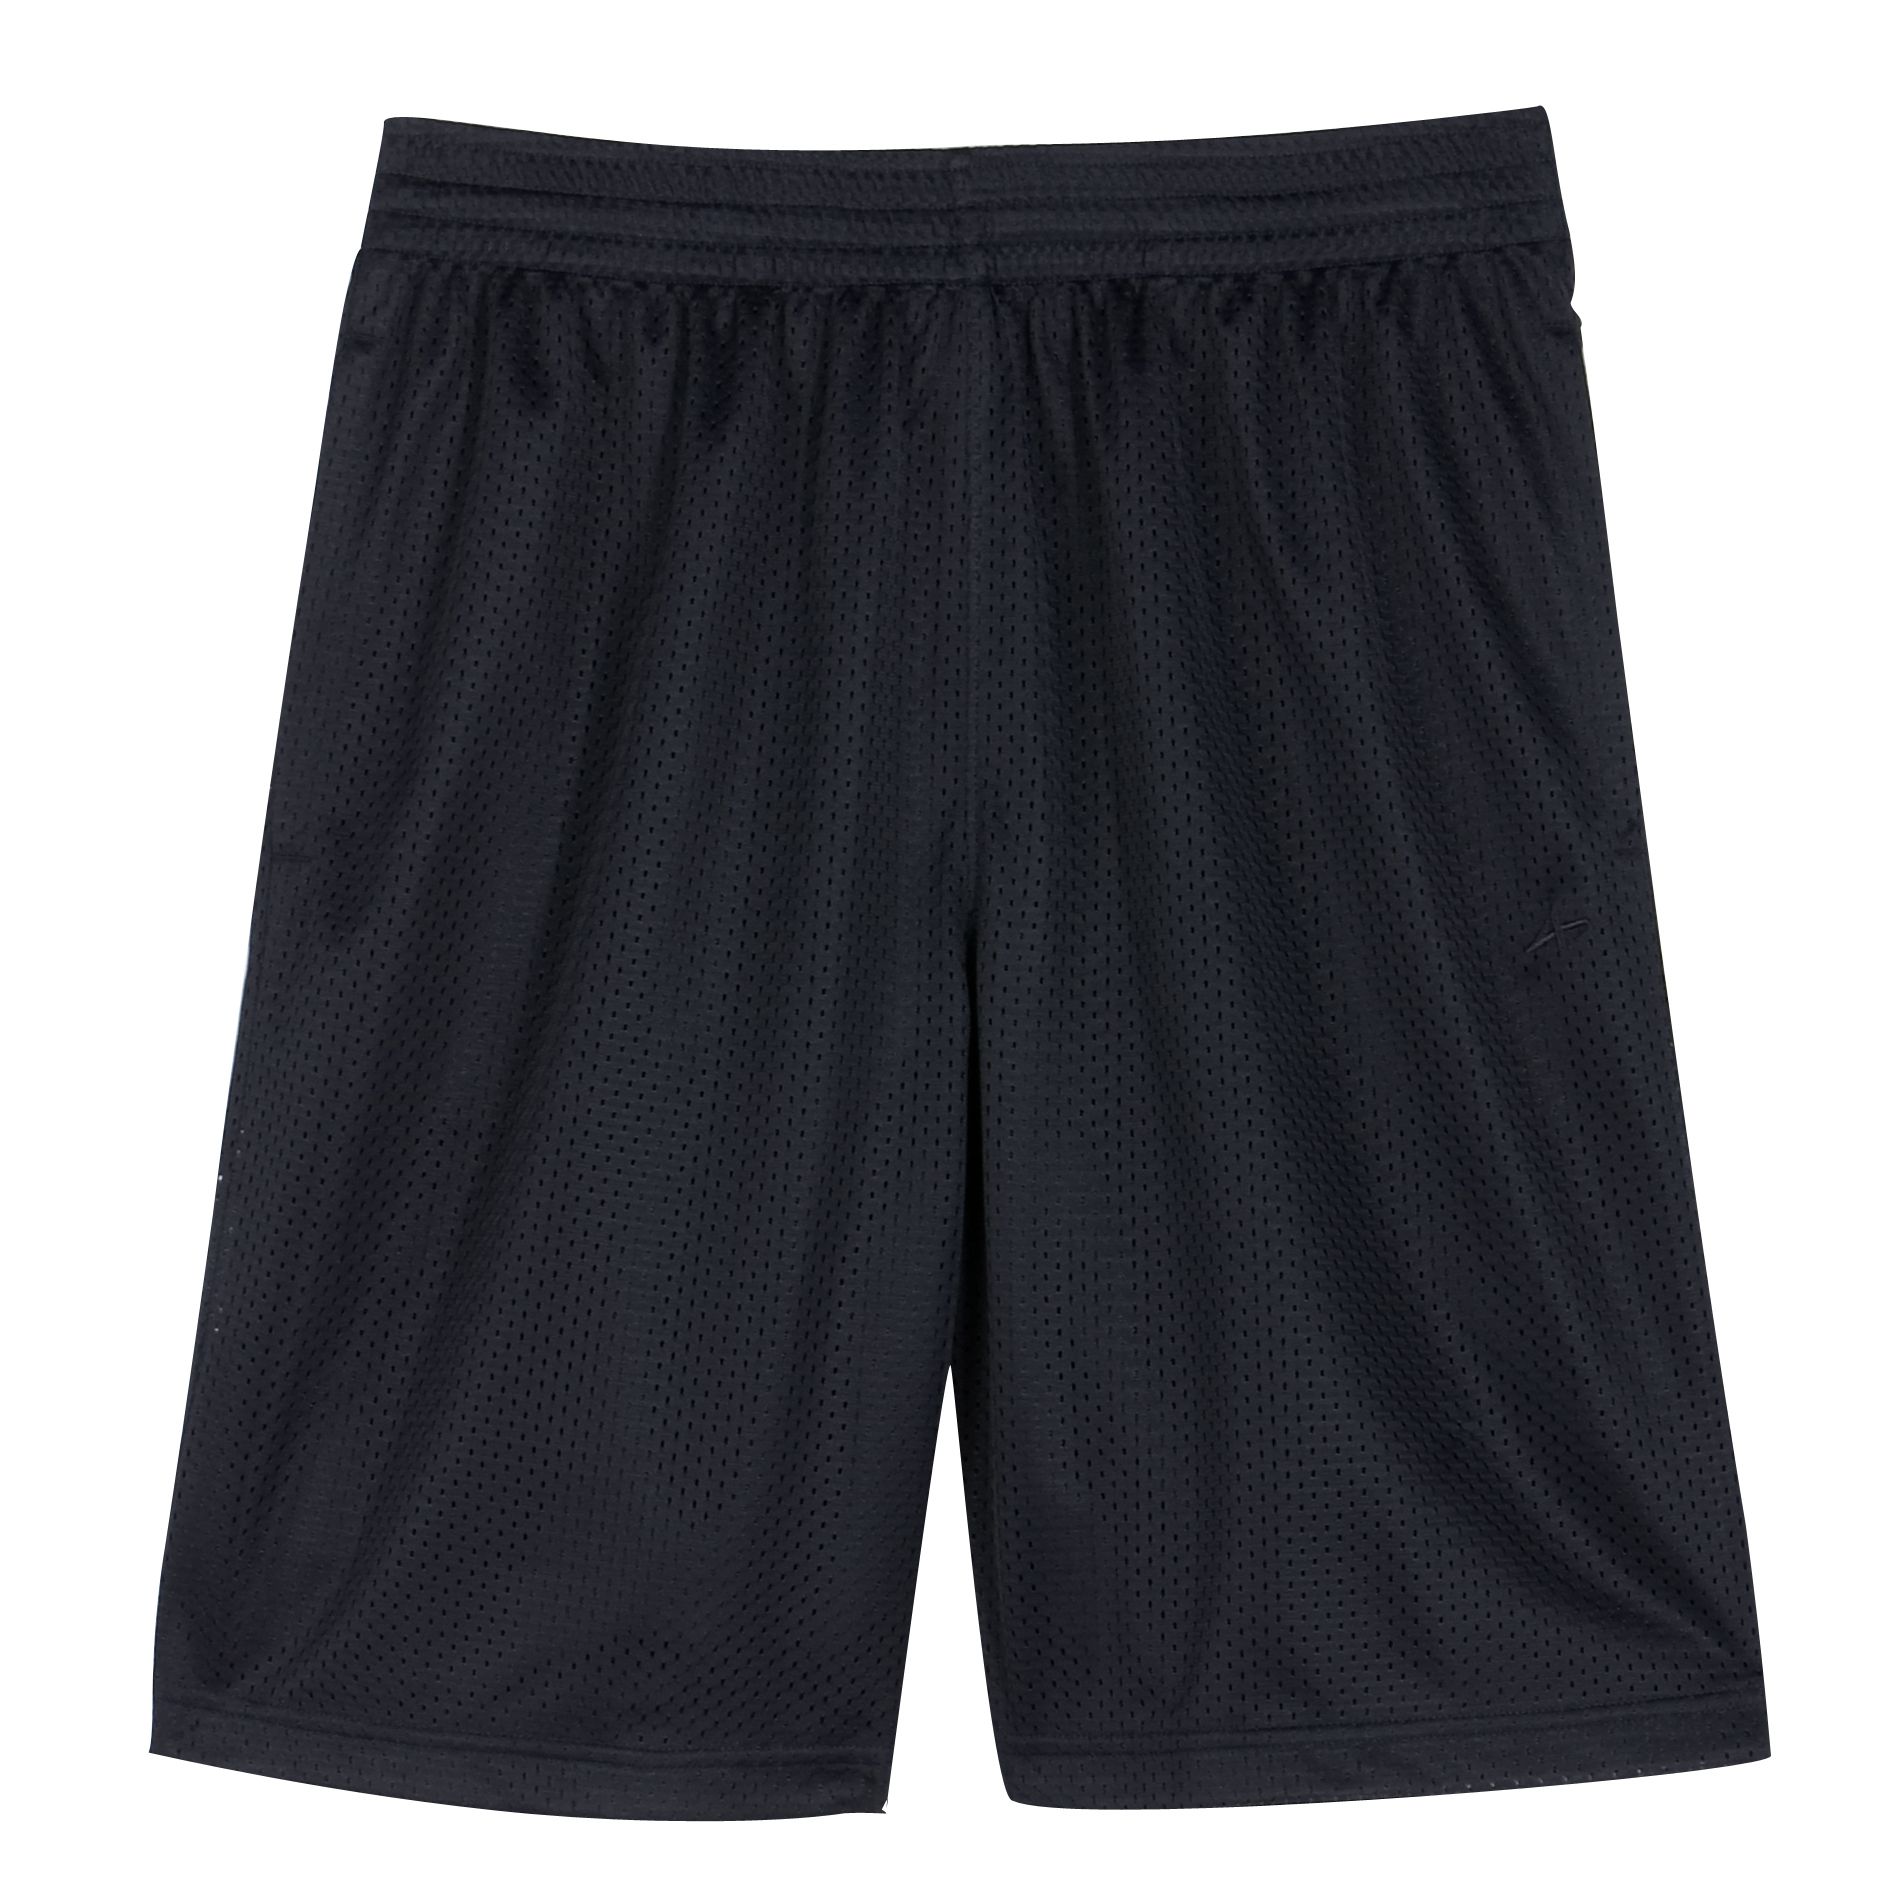 Athletech Men's Solid Color Open Hole Mesh Basketball Shorts - Clothing ...